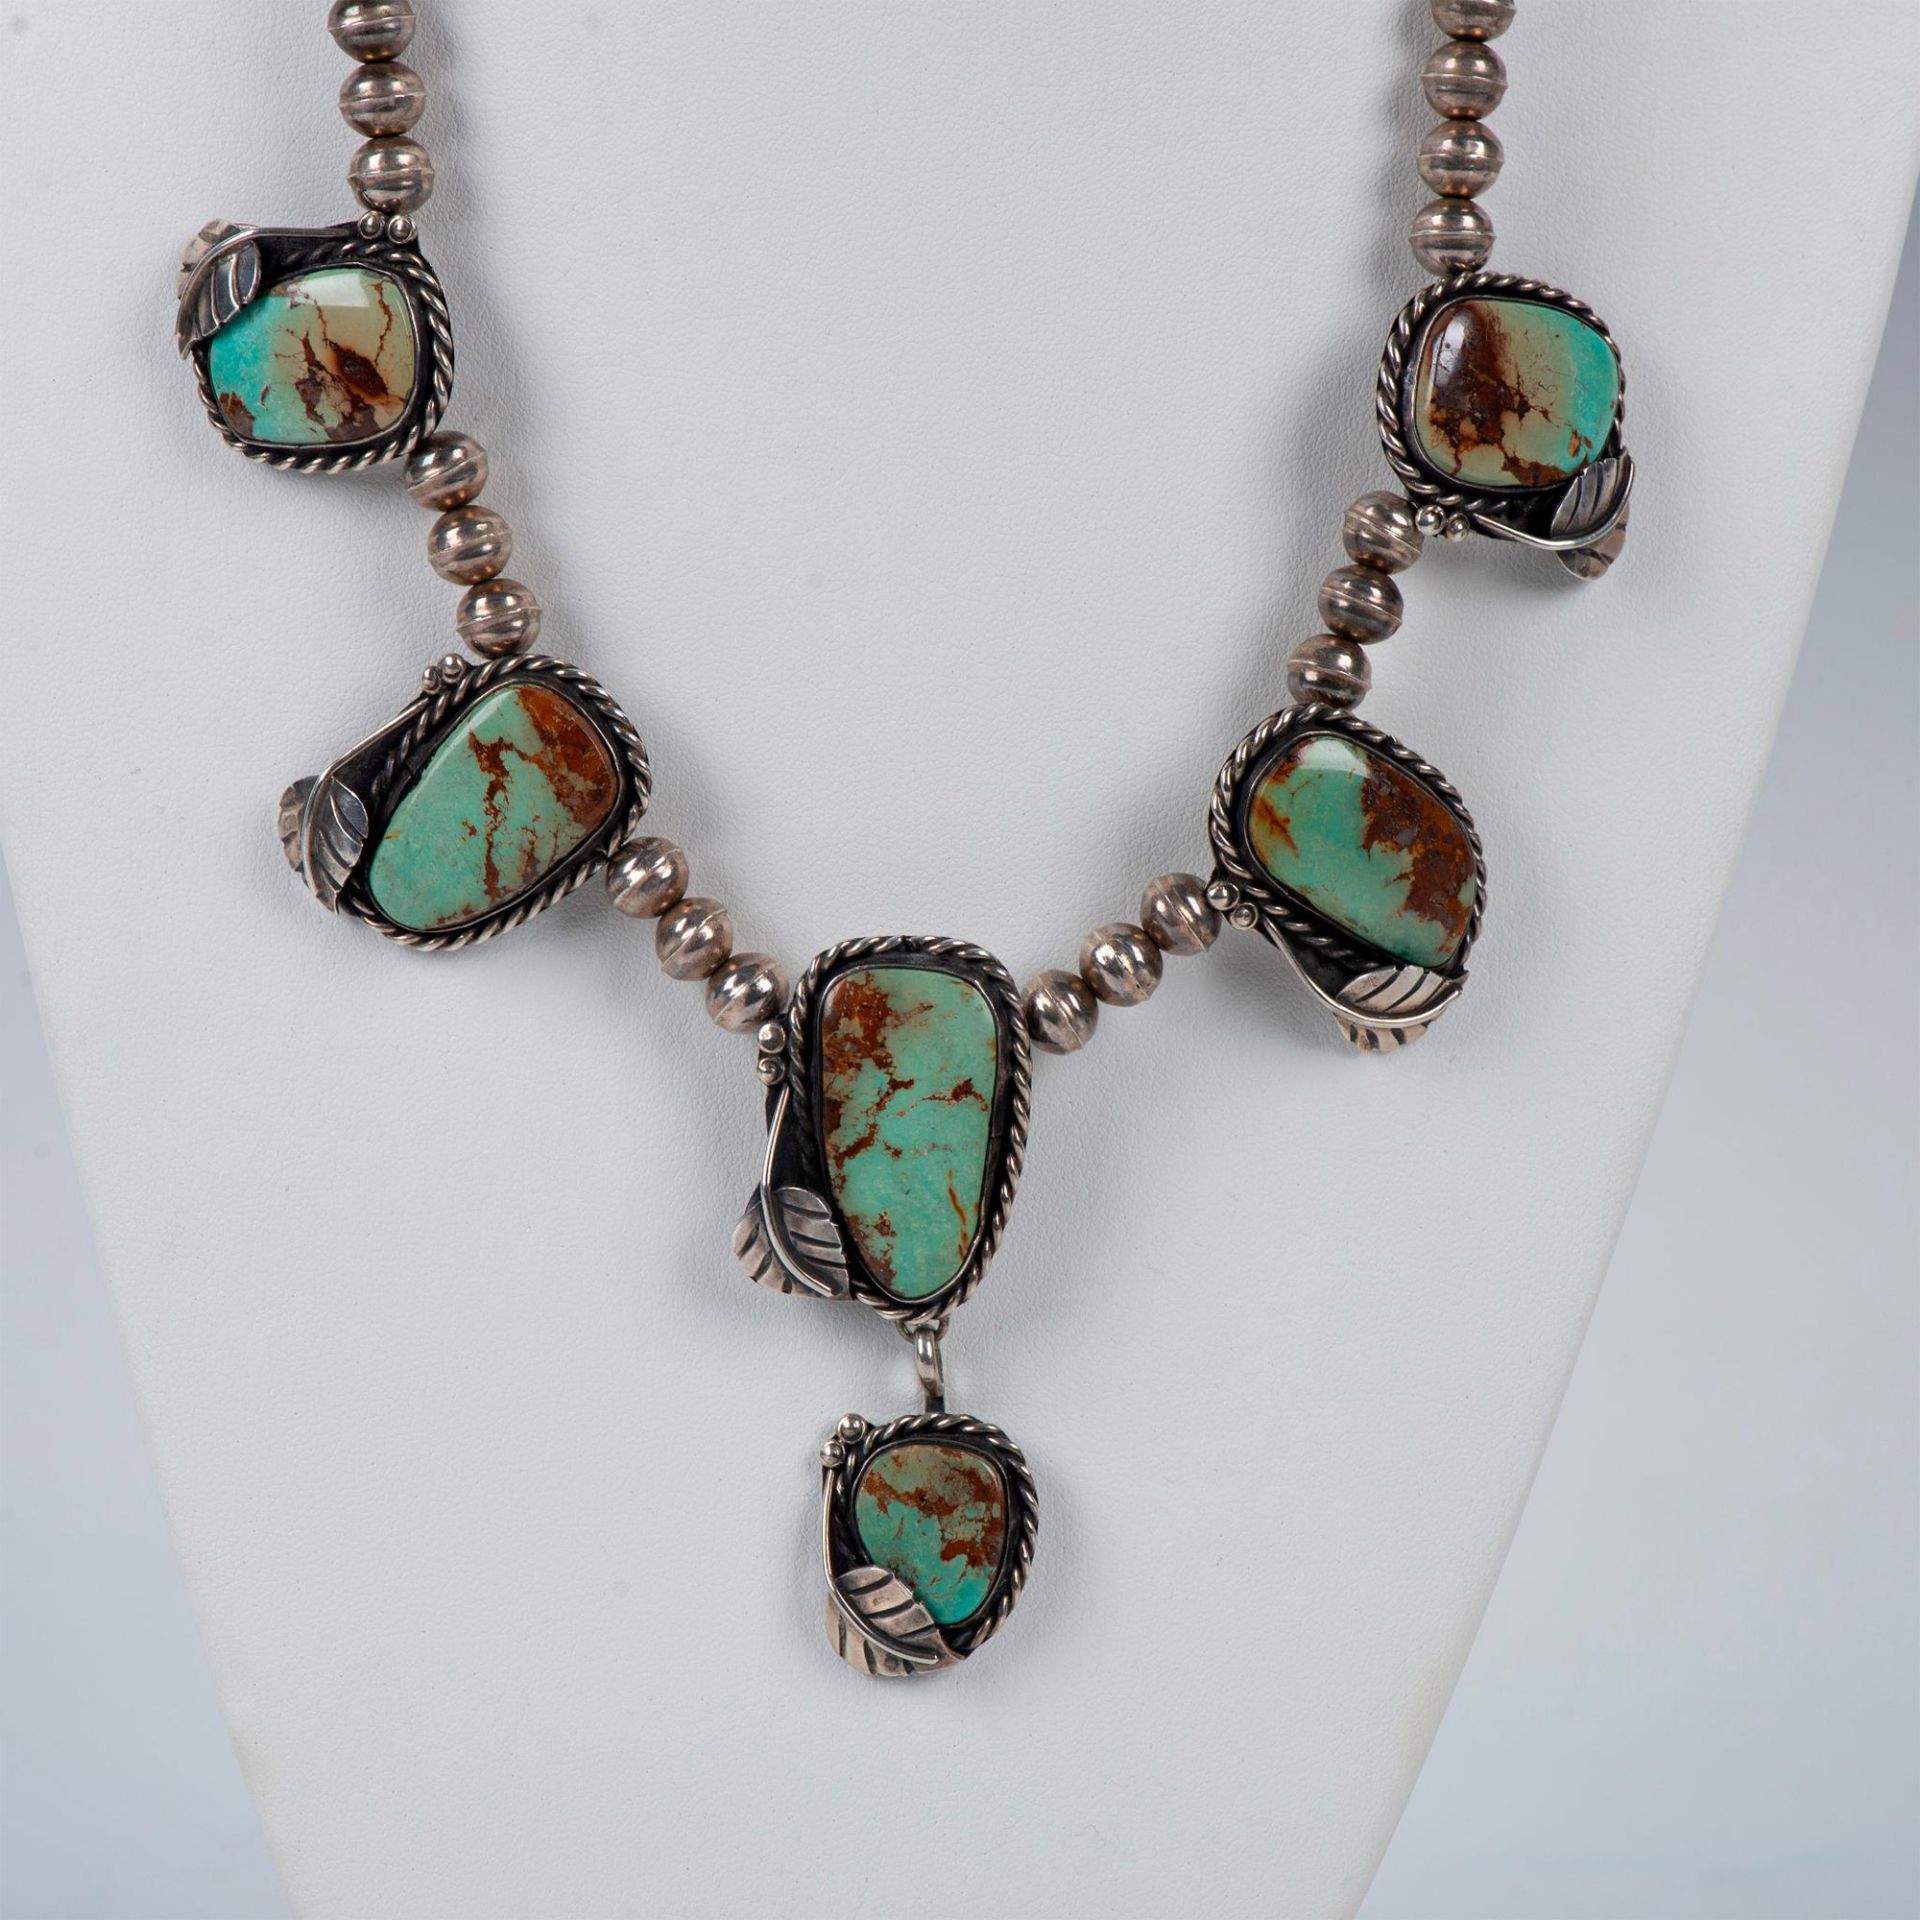 2pc Navajo Sterling Silver and Turquoise Necklace & Ring - Image 2 of 7